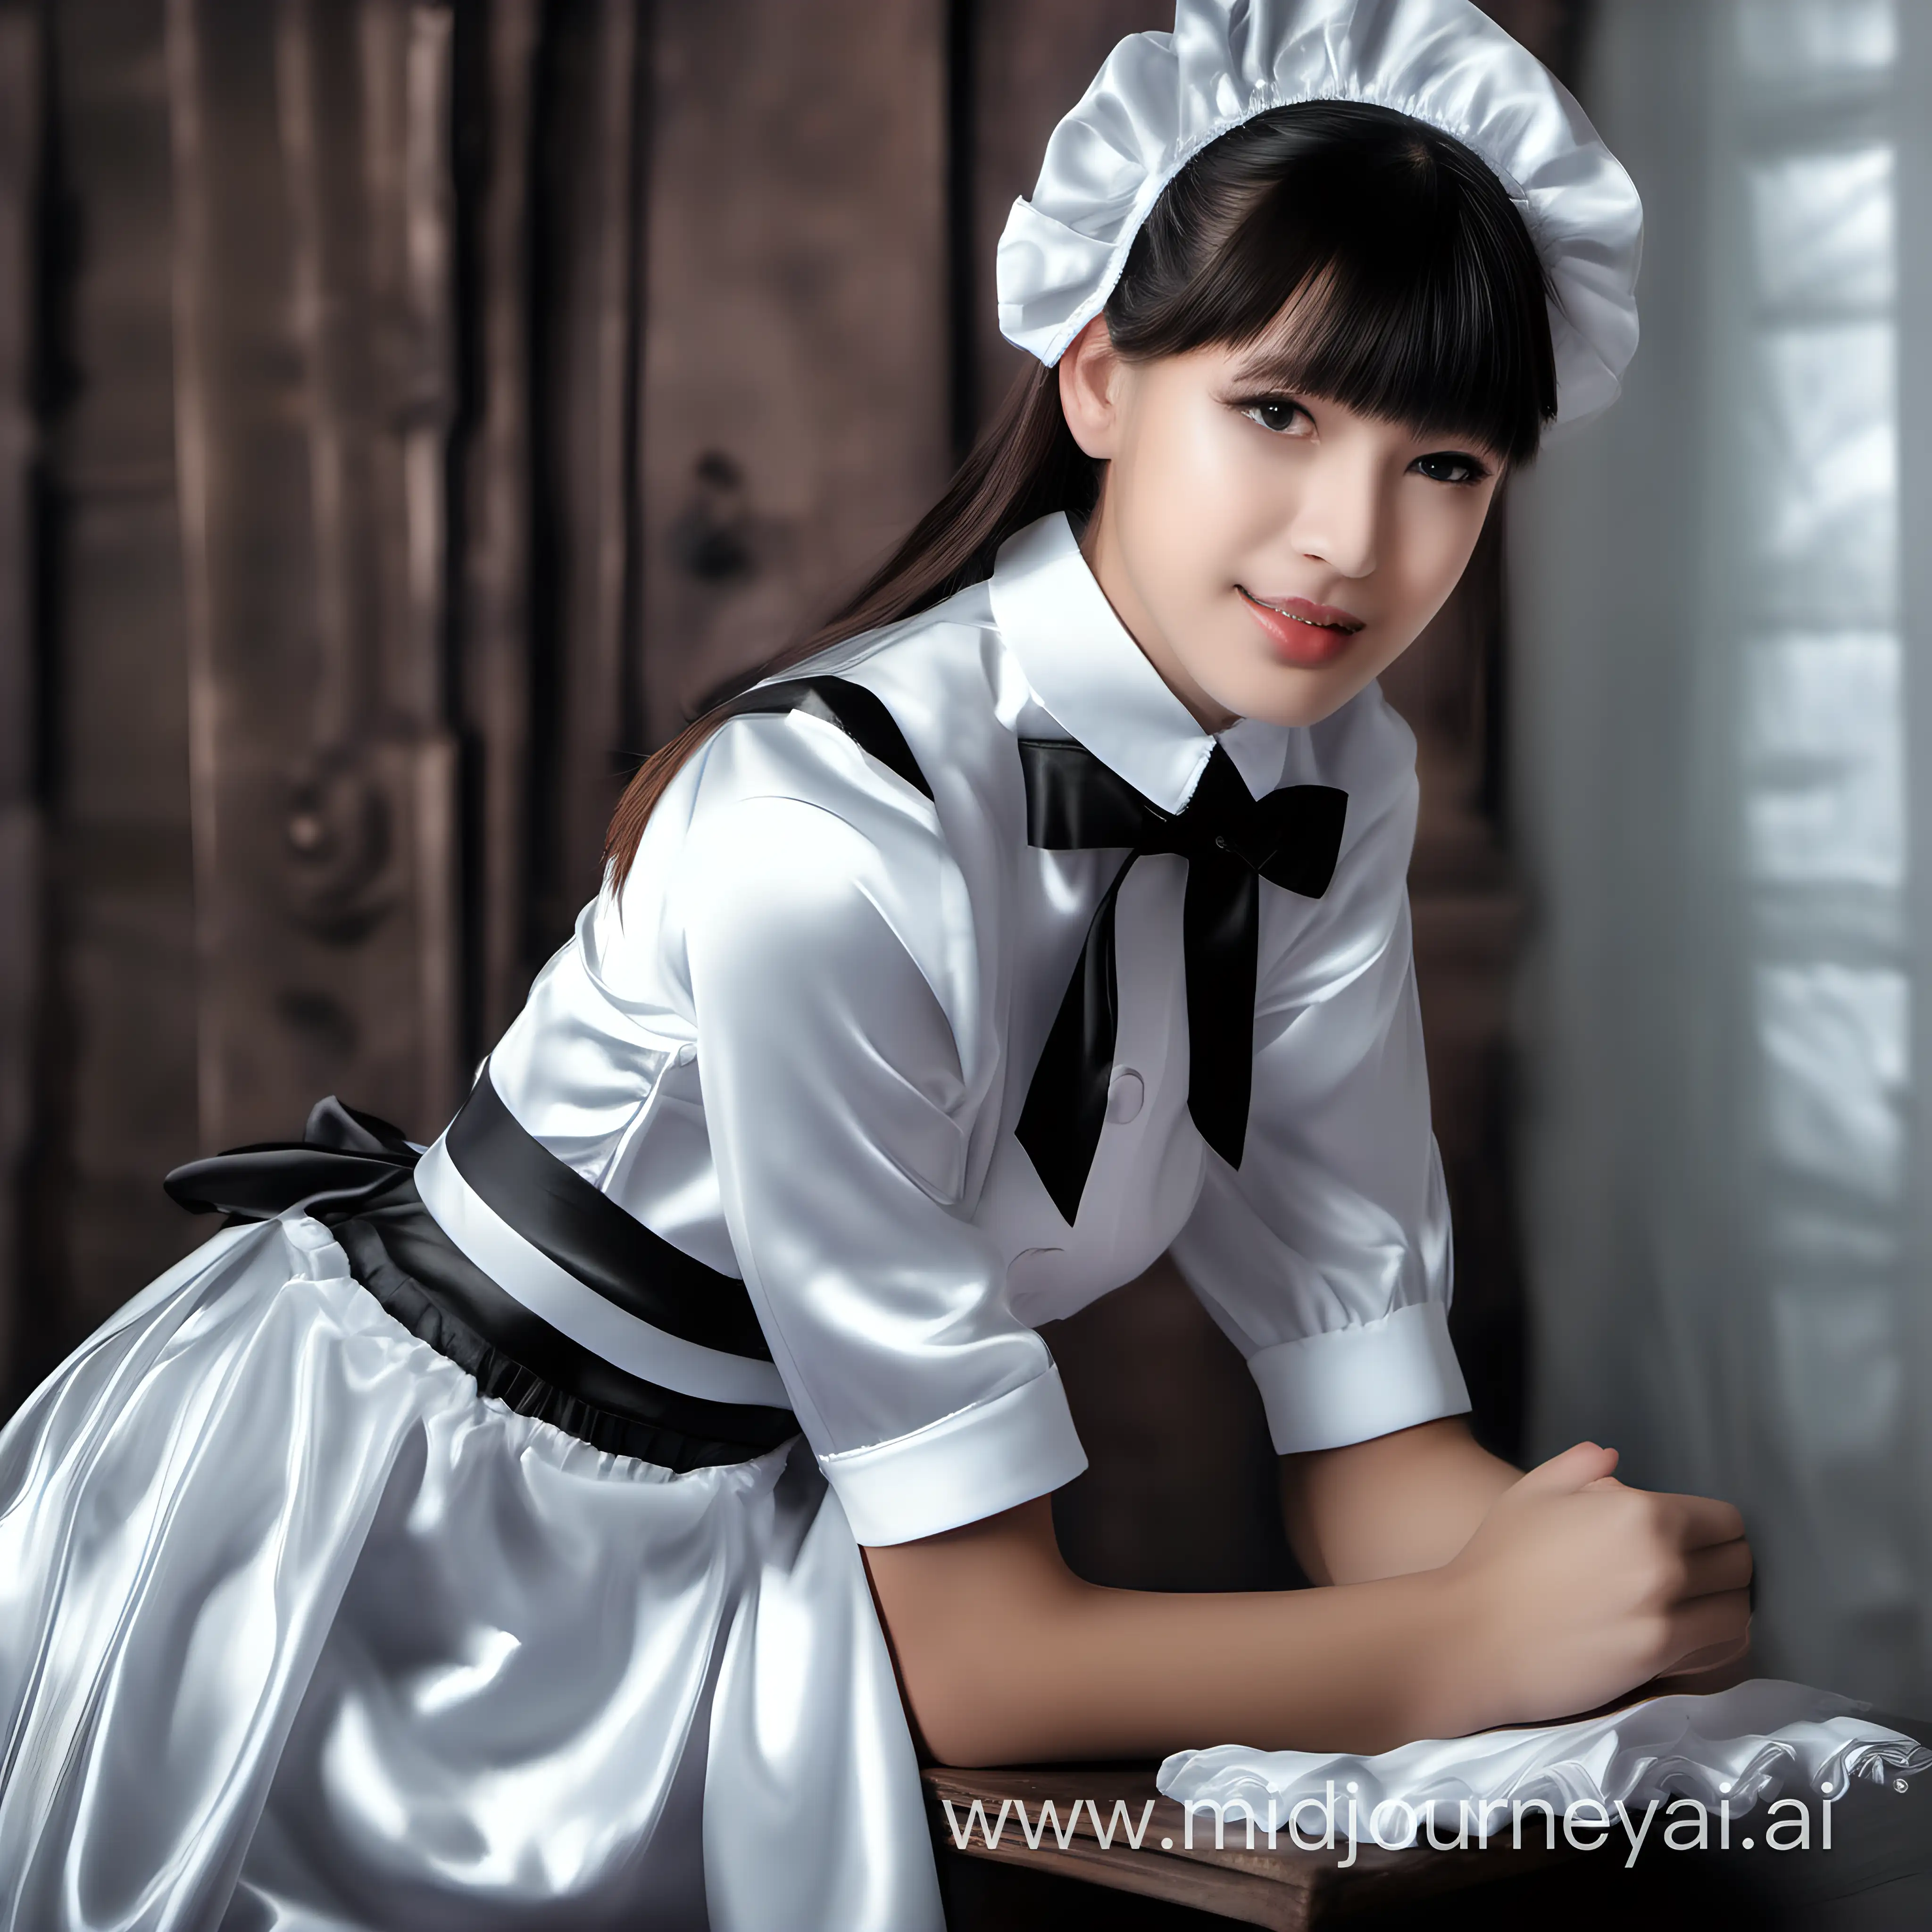 Chic Young Maid in Elegant Satin Uniforms Poses Gracefully